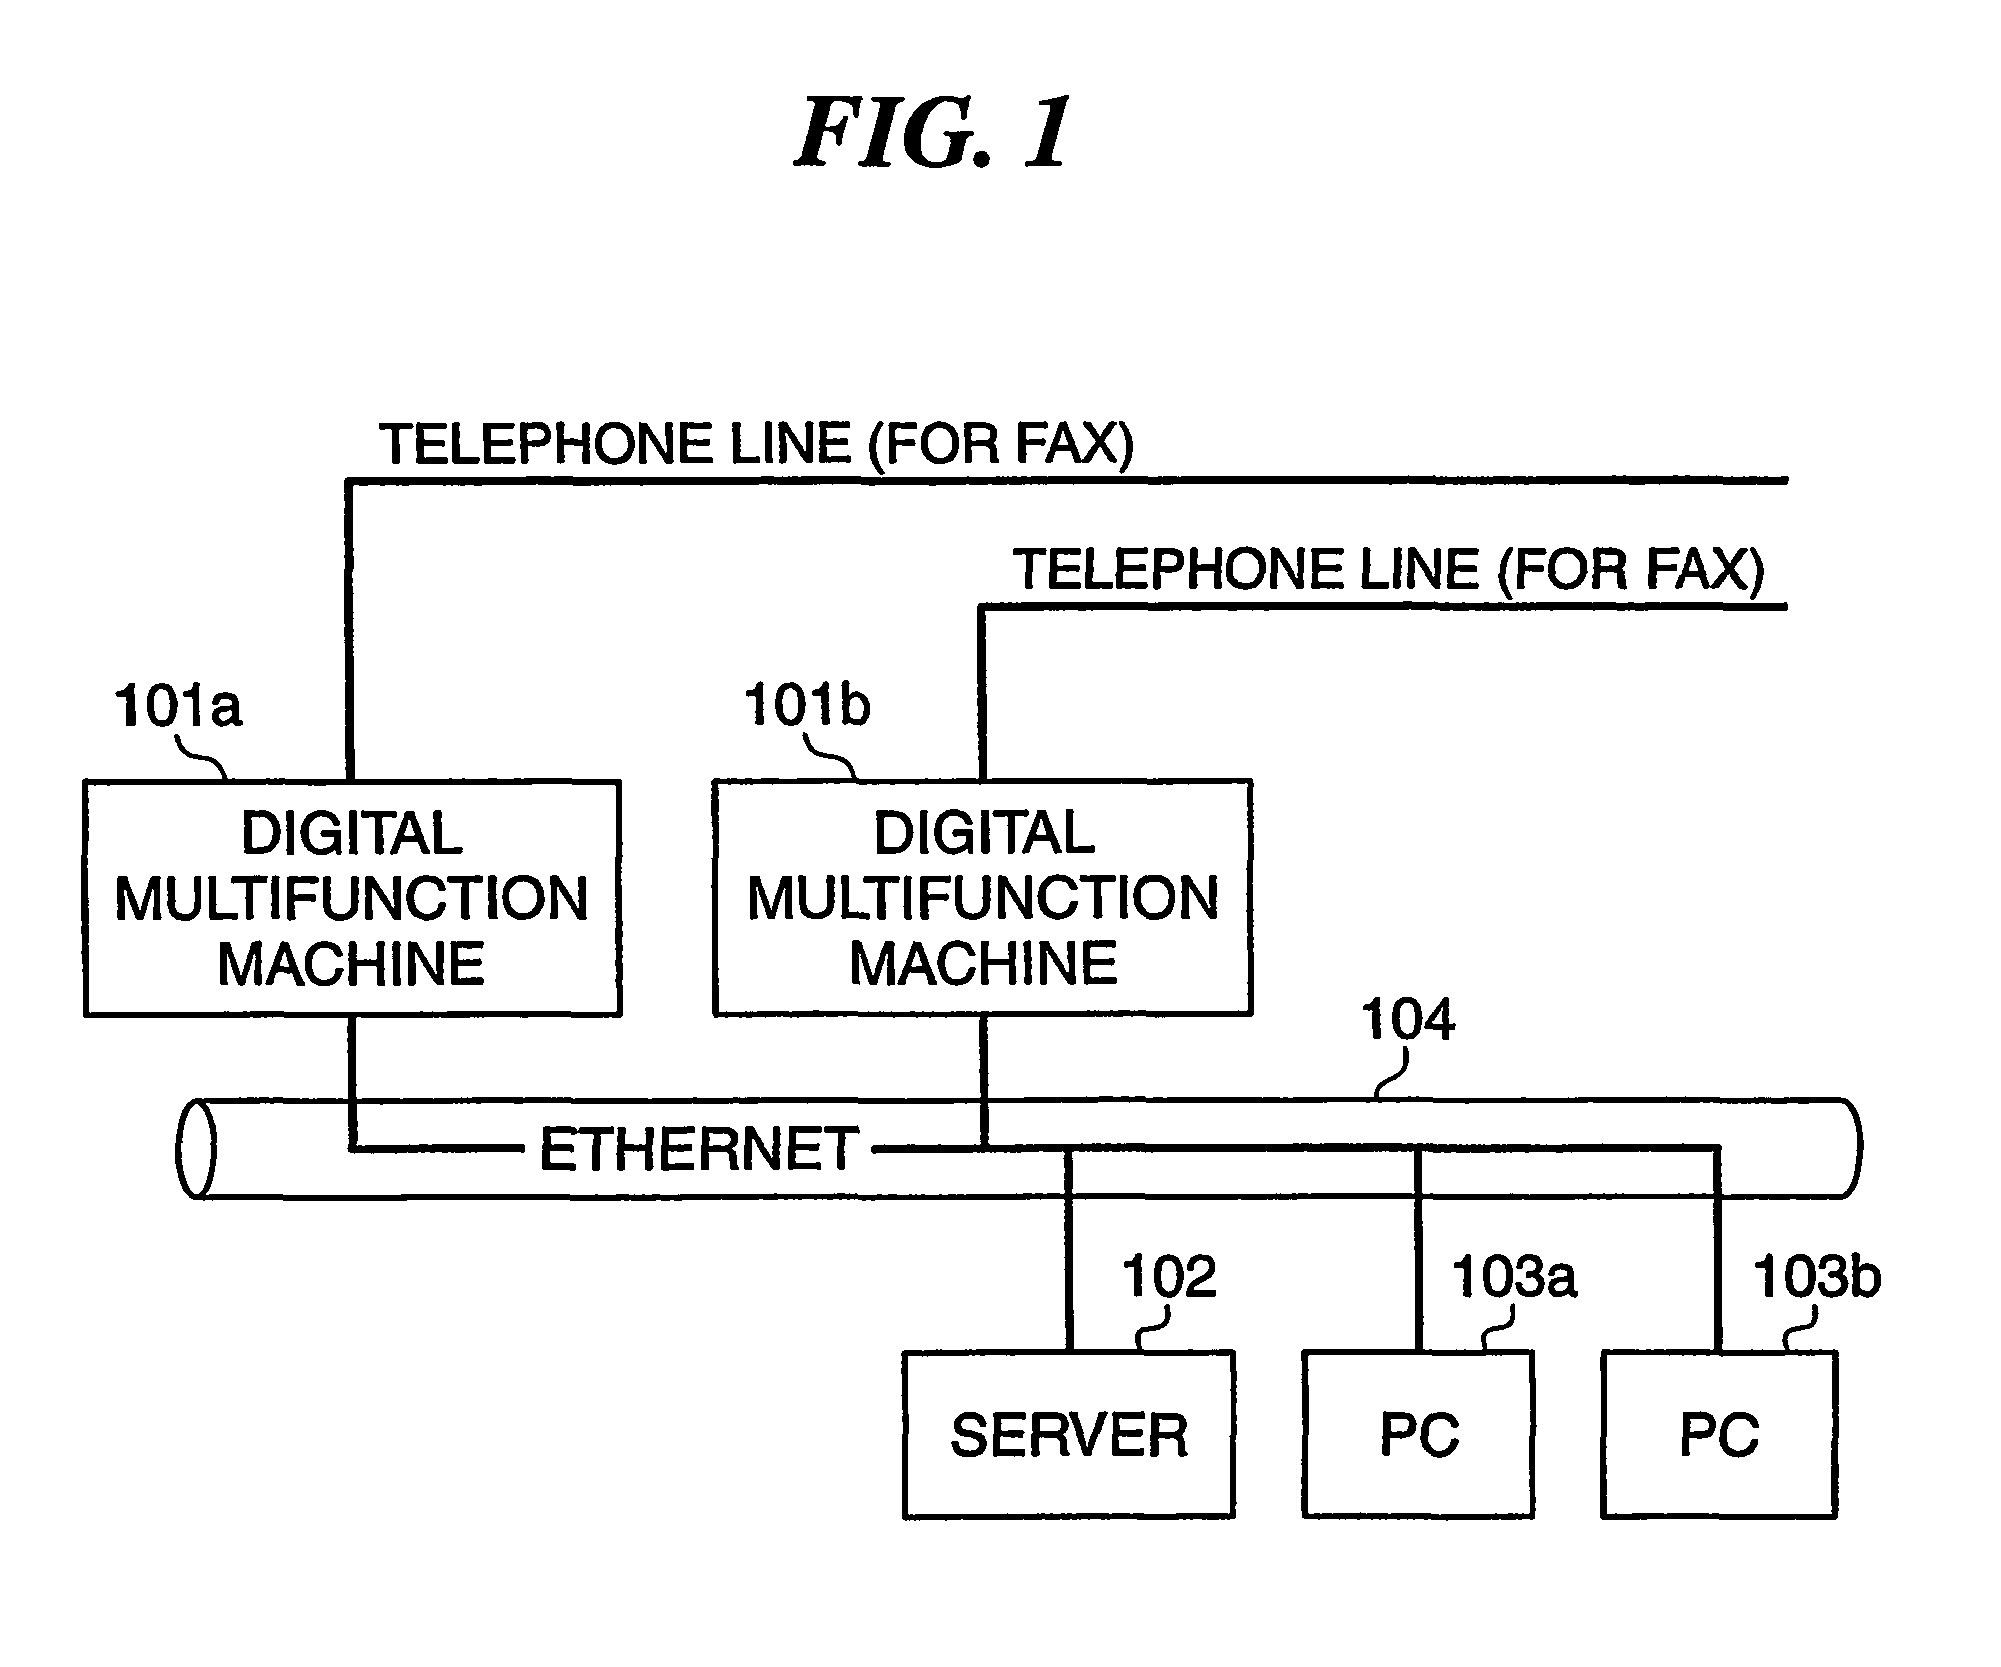 Image forming apparatus having energy-saving mode, control method therefor, network system including the image forming apparatus, and control method therefor